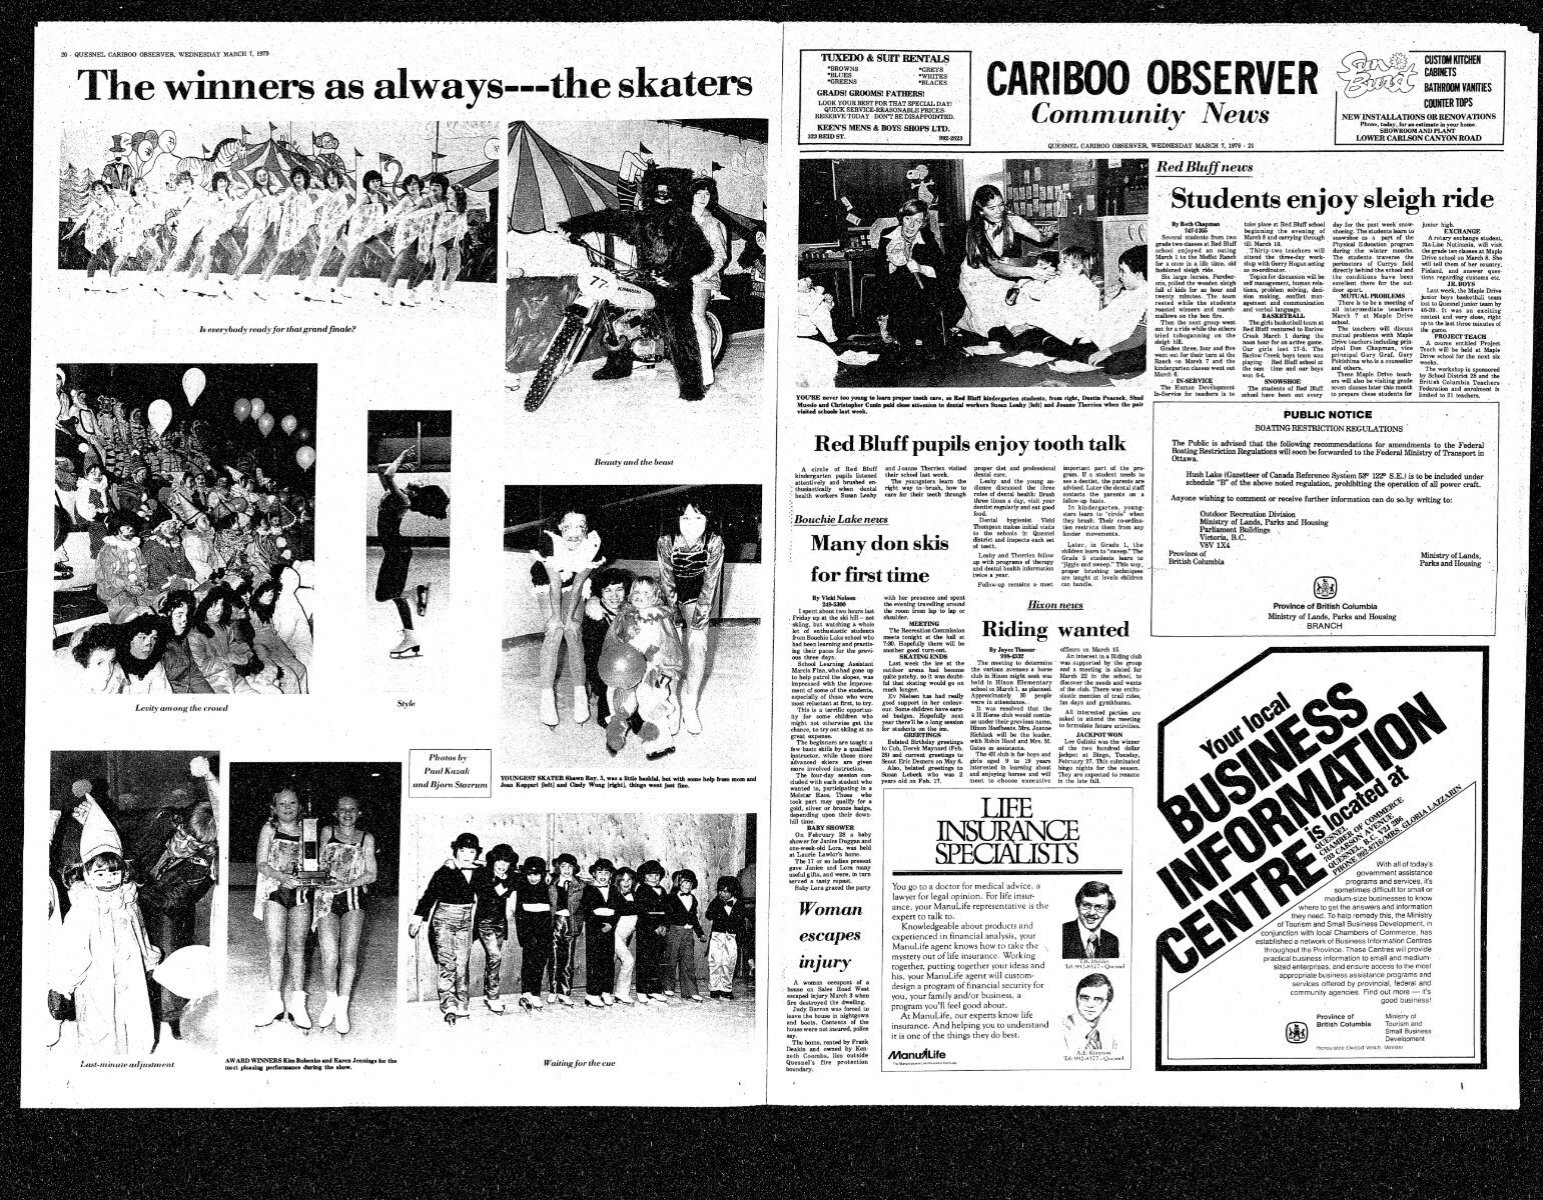 19790307_Cariboo Observer-4.pdf - the Quesnel & District Museum